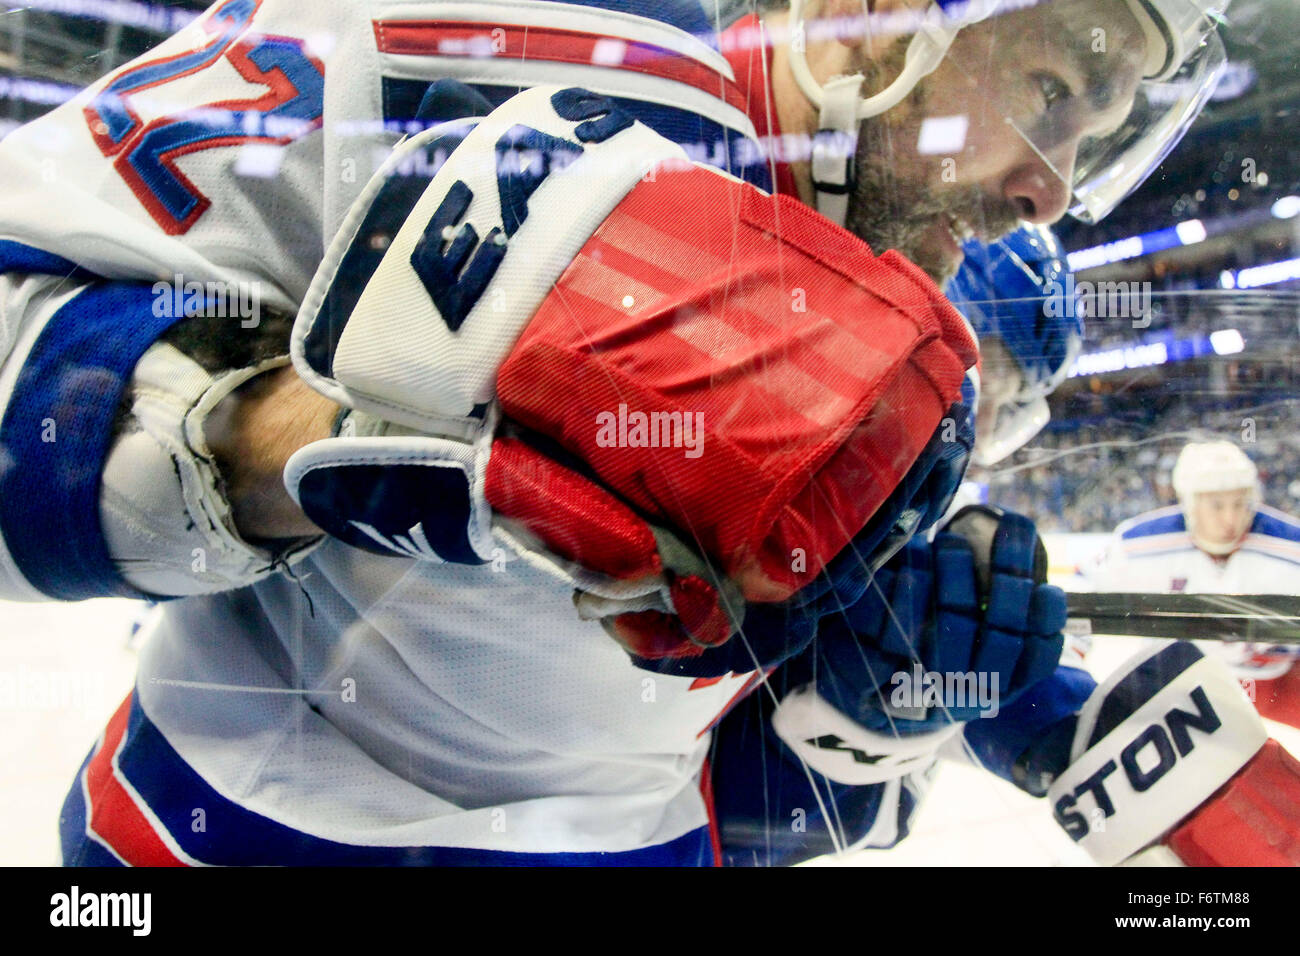 Tampa, Florida, USA. 19th Nov, 2015. Tampa Bay Lightning right wing Joel Vermin (47) checks New York Rangers defenseman Dan Boyle (22) into the glass during first period action at the Amalie Arena. Credit:  Dirk Shadd/Tampa Bay Times/ZUMA Wire/Alamy Live News Stock Photo